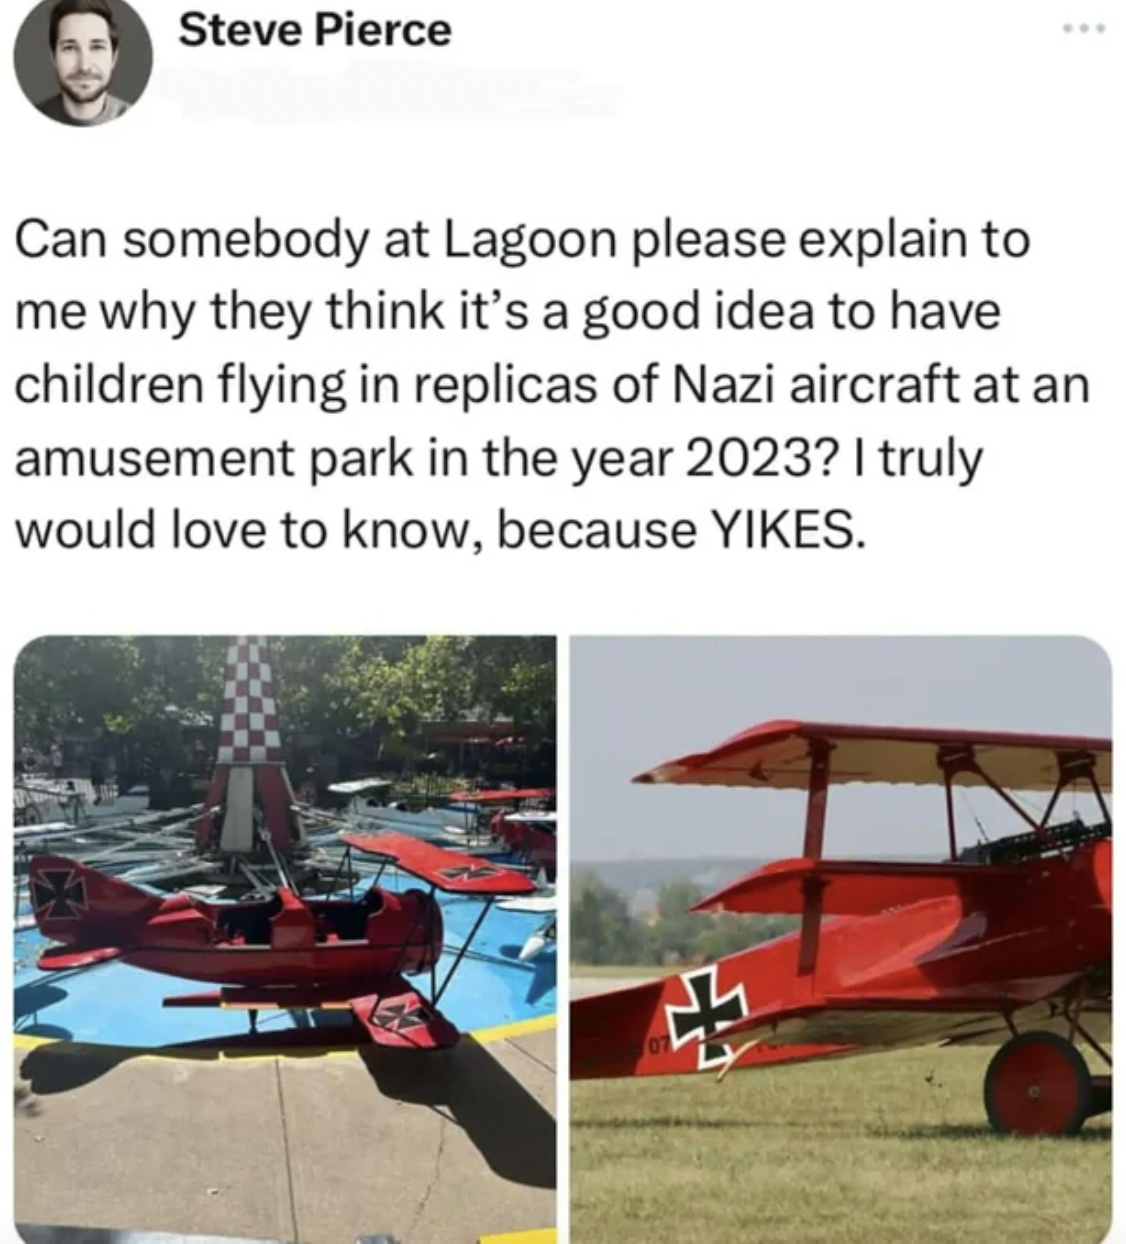 vehicle - Steve Pierce www Can somebody at Lagoon please explain to me why they think it's a good idea to have children flying in replicas of Nazi aircraft at an amusement park in the year 2023? I truly would love to know, because Yikes. H